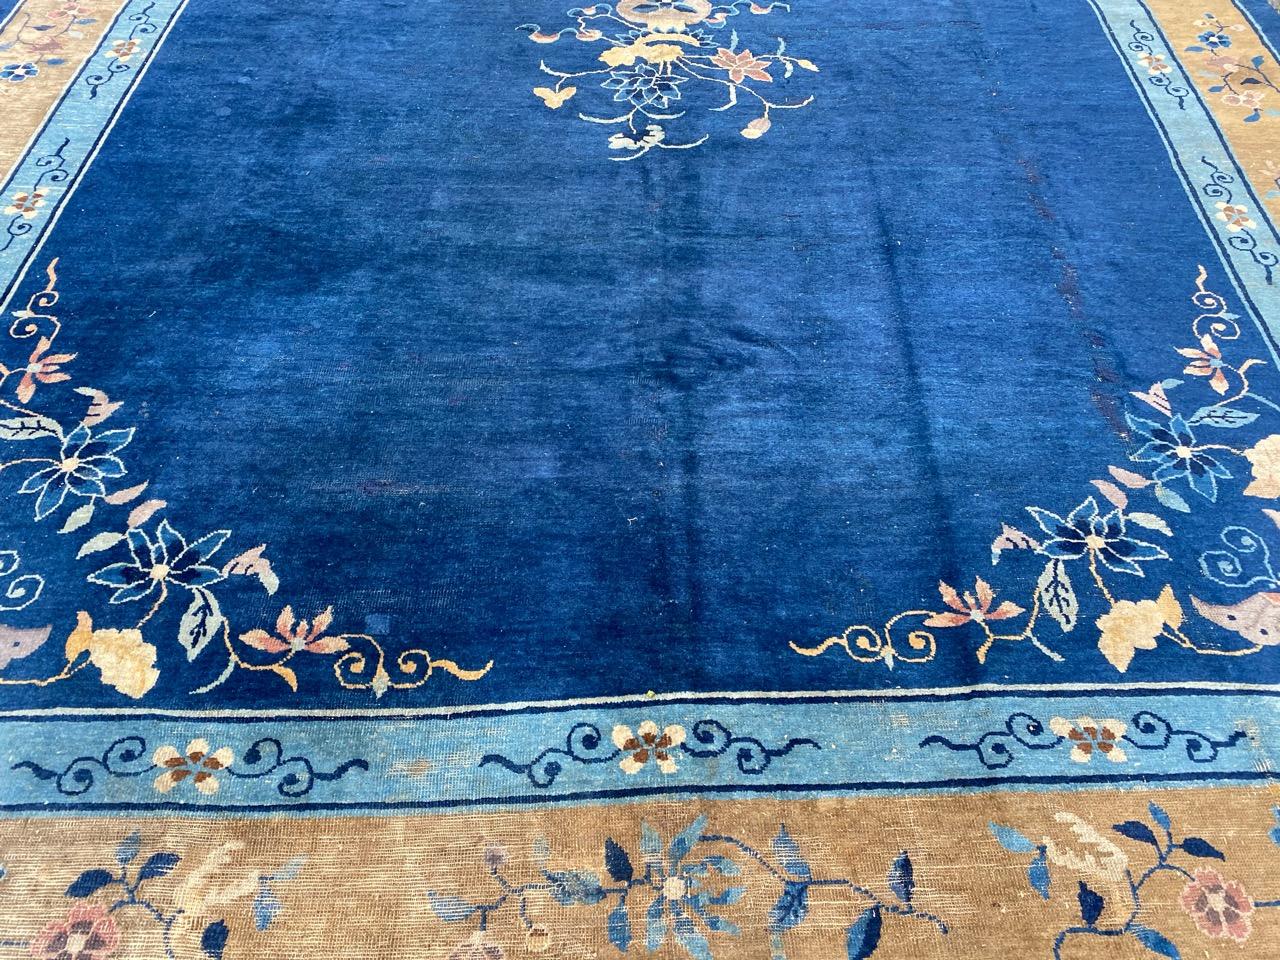 Bobyrug’s Nice Large Antique Chinese Rug 7